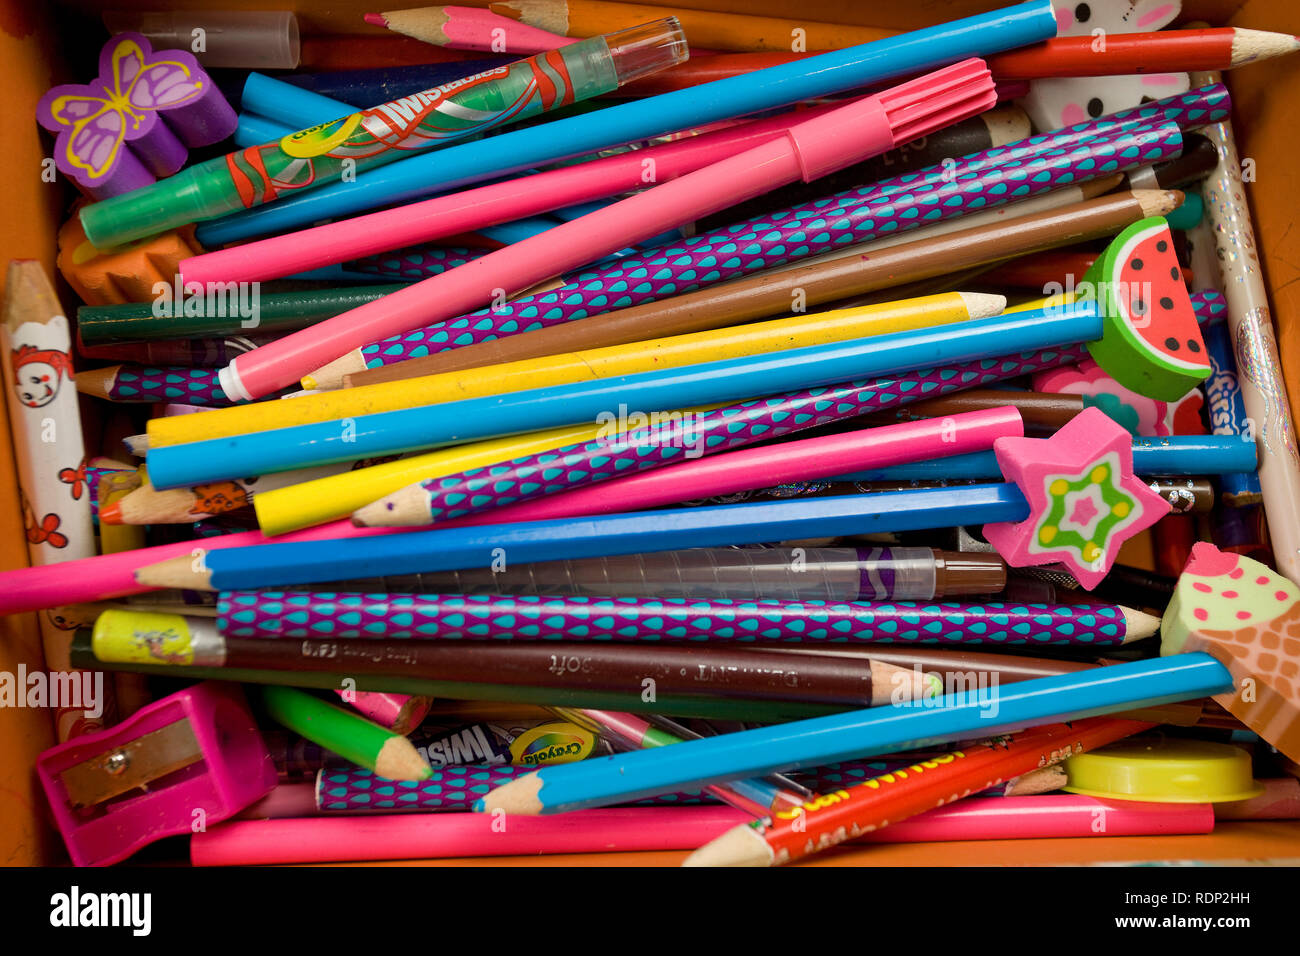 Childrens colouring pens and pencils Stock Photo